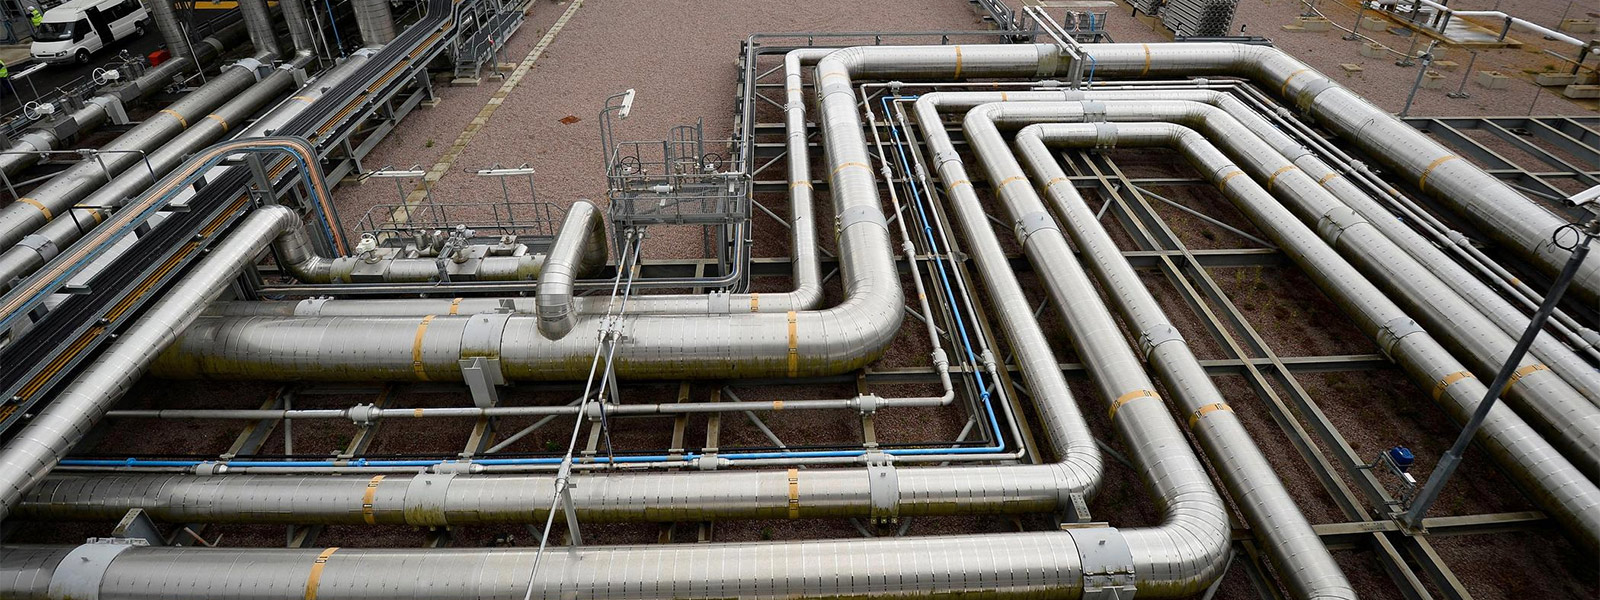 National Grid's liquified natural gas (LNG) plant is seen at the Isle of Grain in southern England. Reuters